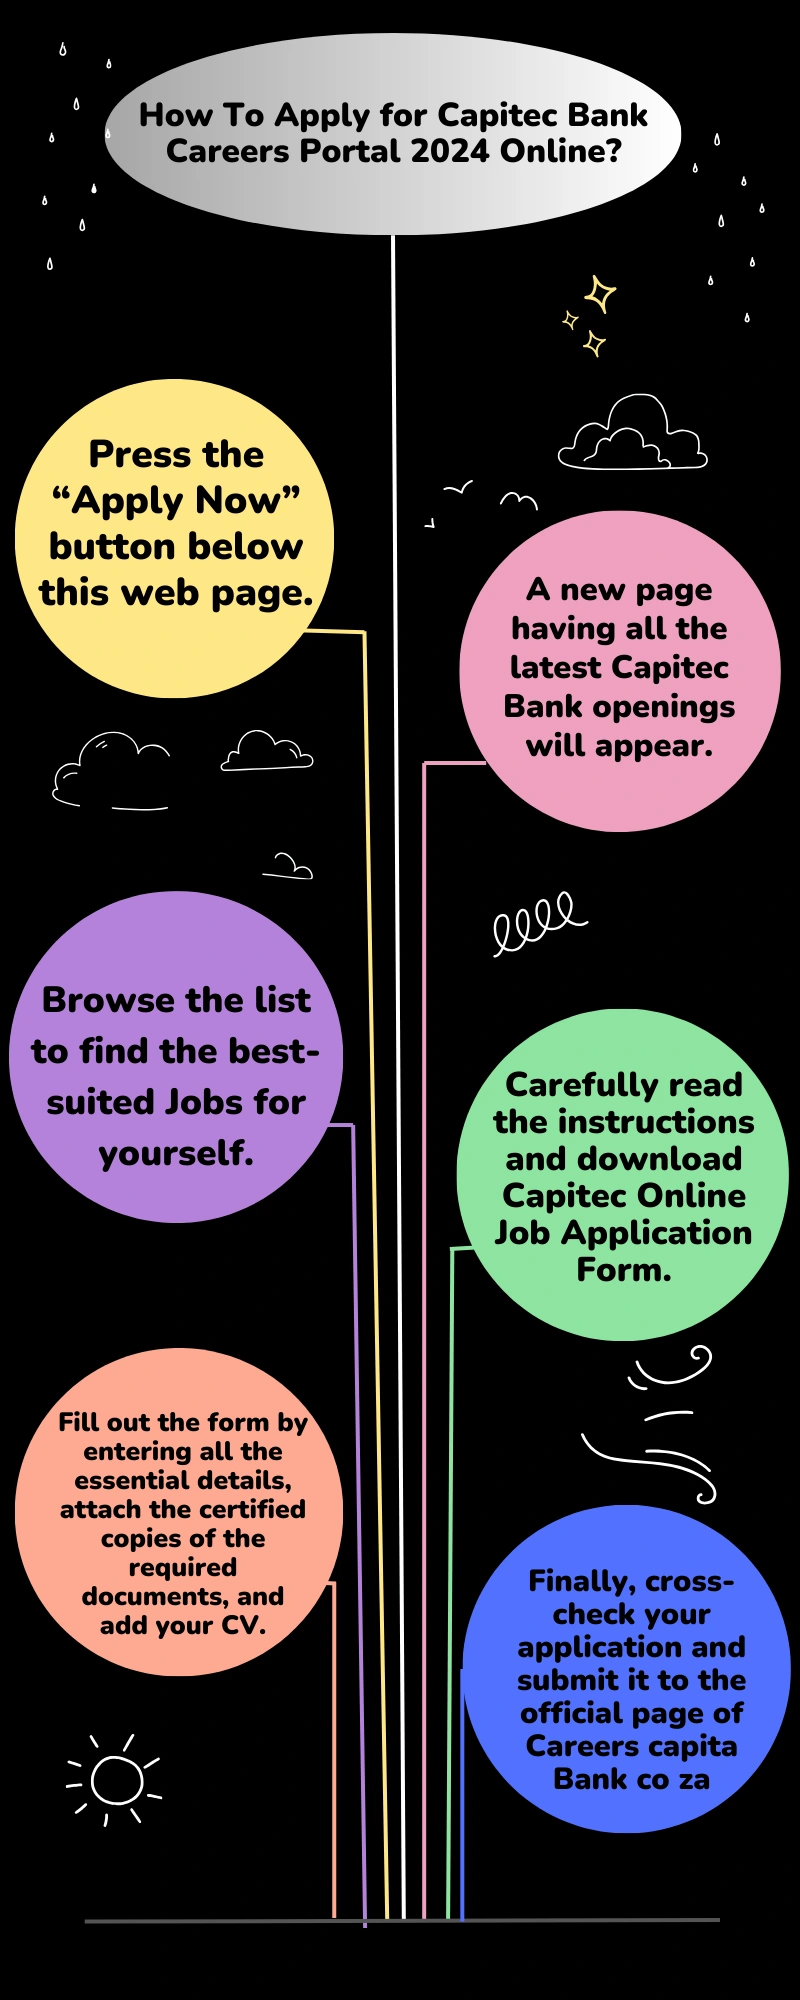 How To Apply for Capitec Bank Careers Portal 2024 Online?